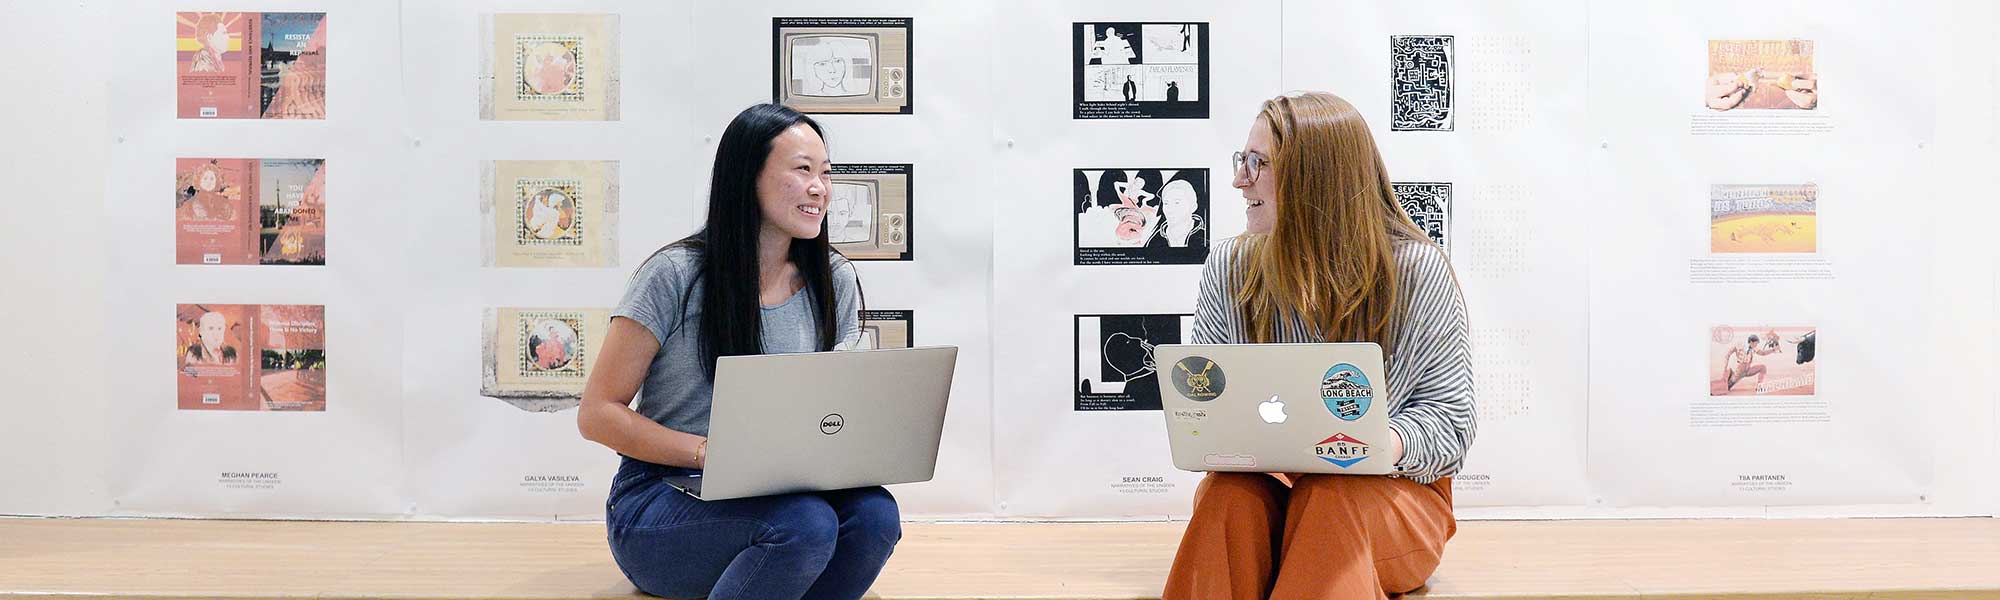 two students sitting apart with laptops smiling at each other